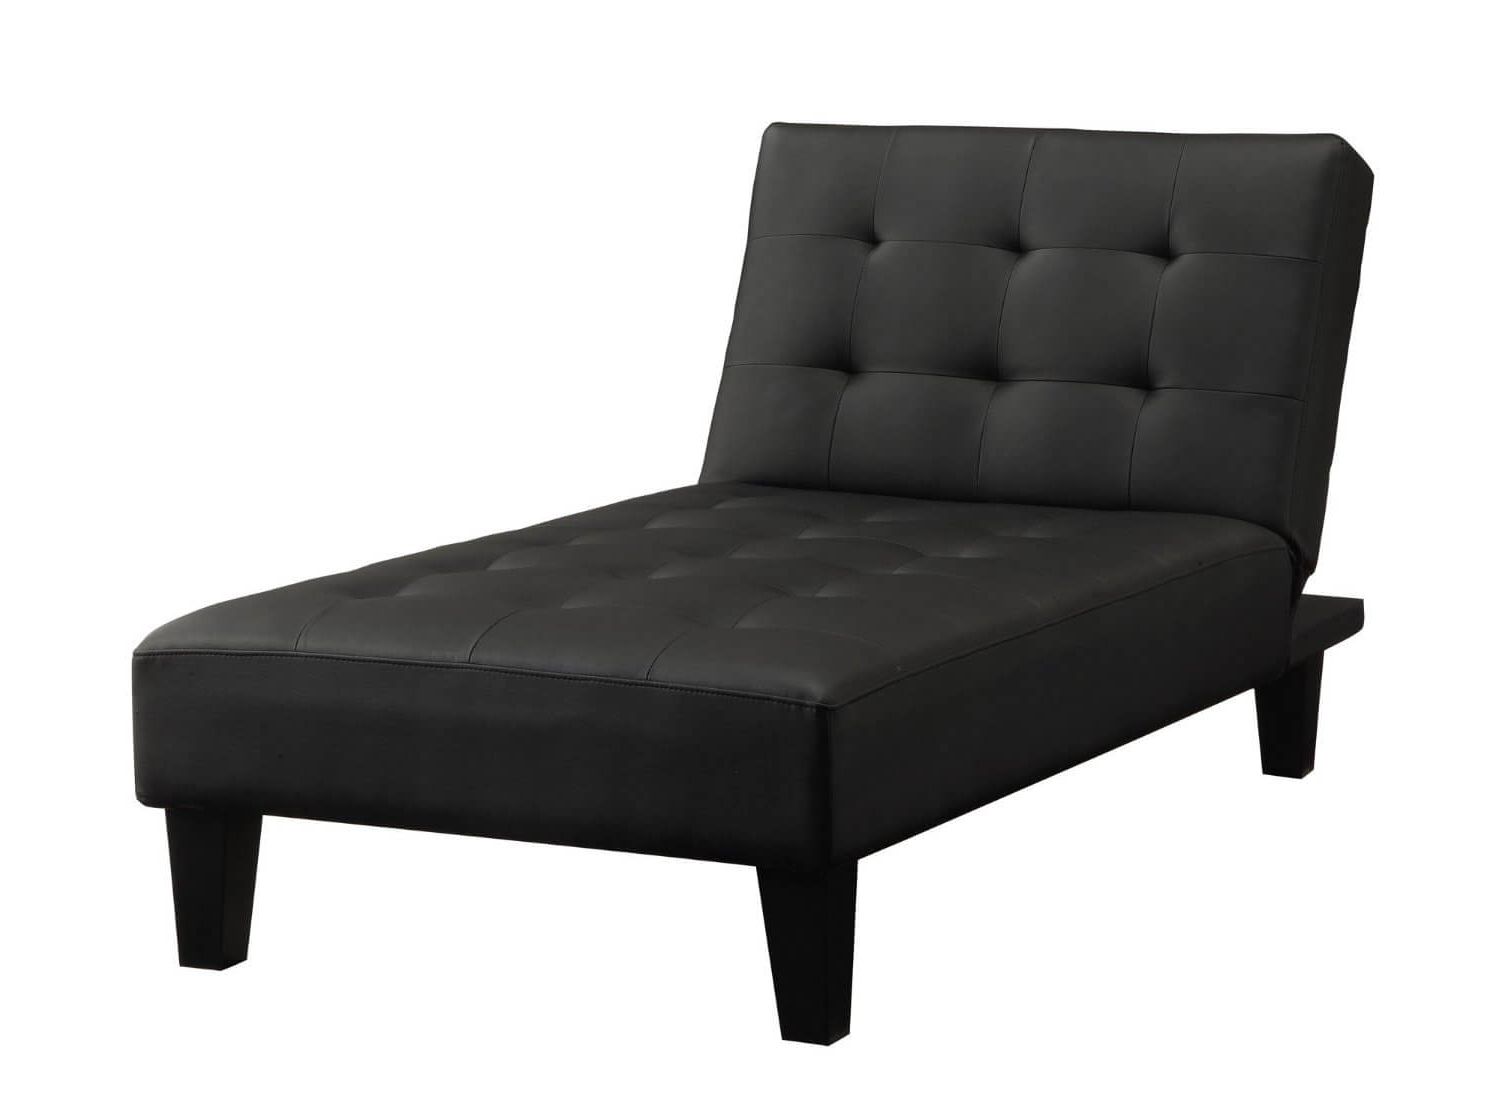 Black Chaise Lounges Within Latest Top 20 Types Of Black Chaise Lounges (buying Guide) – (View 4 of 15)